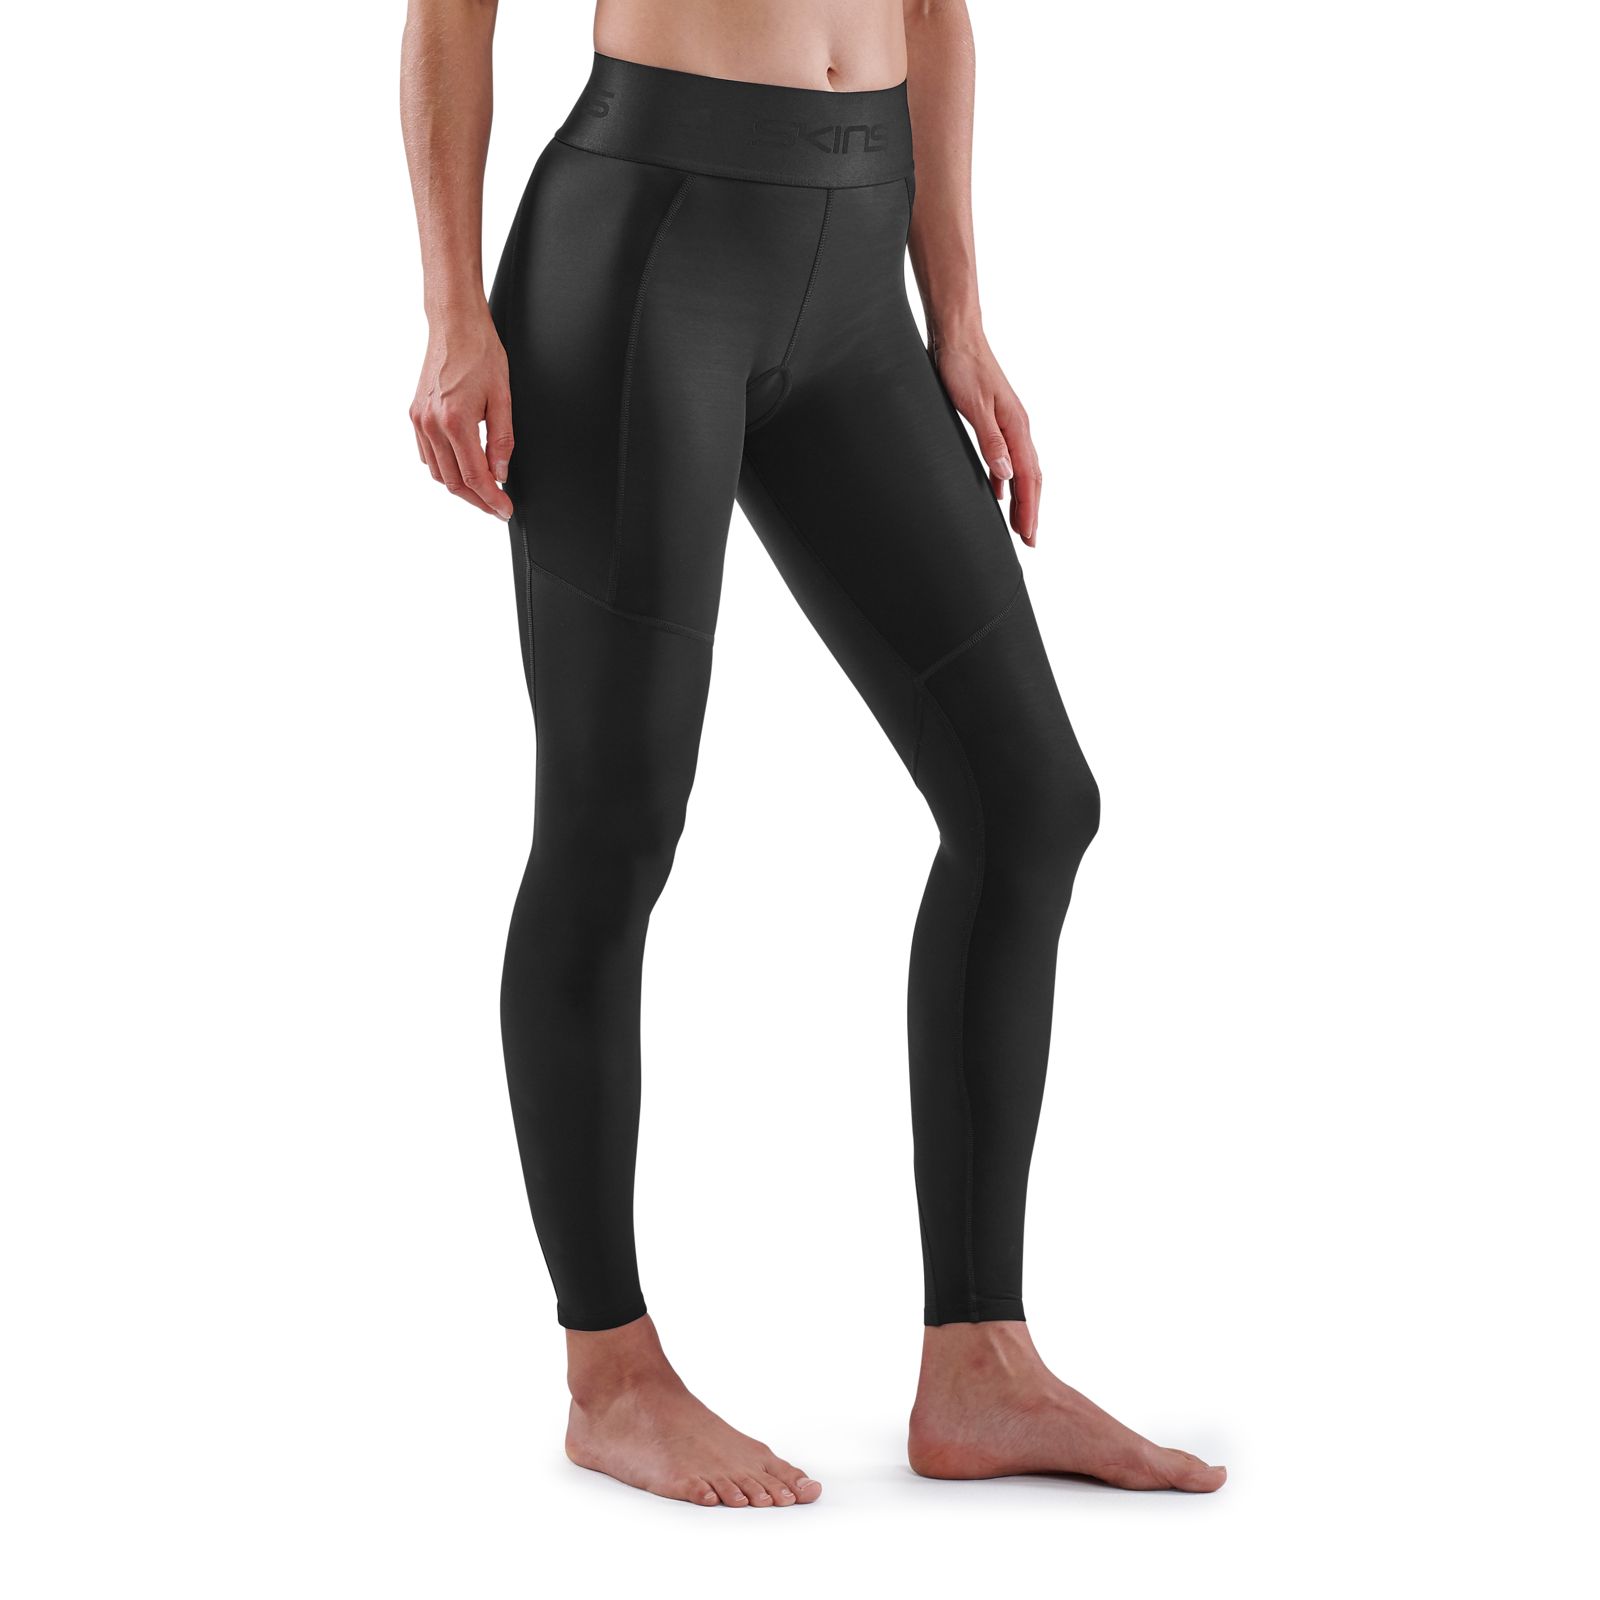 SLIM Anti Cellulite High Waisted Compression 3/4 Length Leggings - Proskins  Men and Womens Baselayers and Sportswear